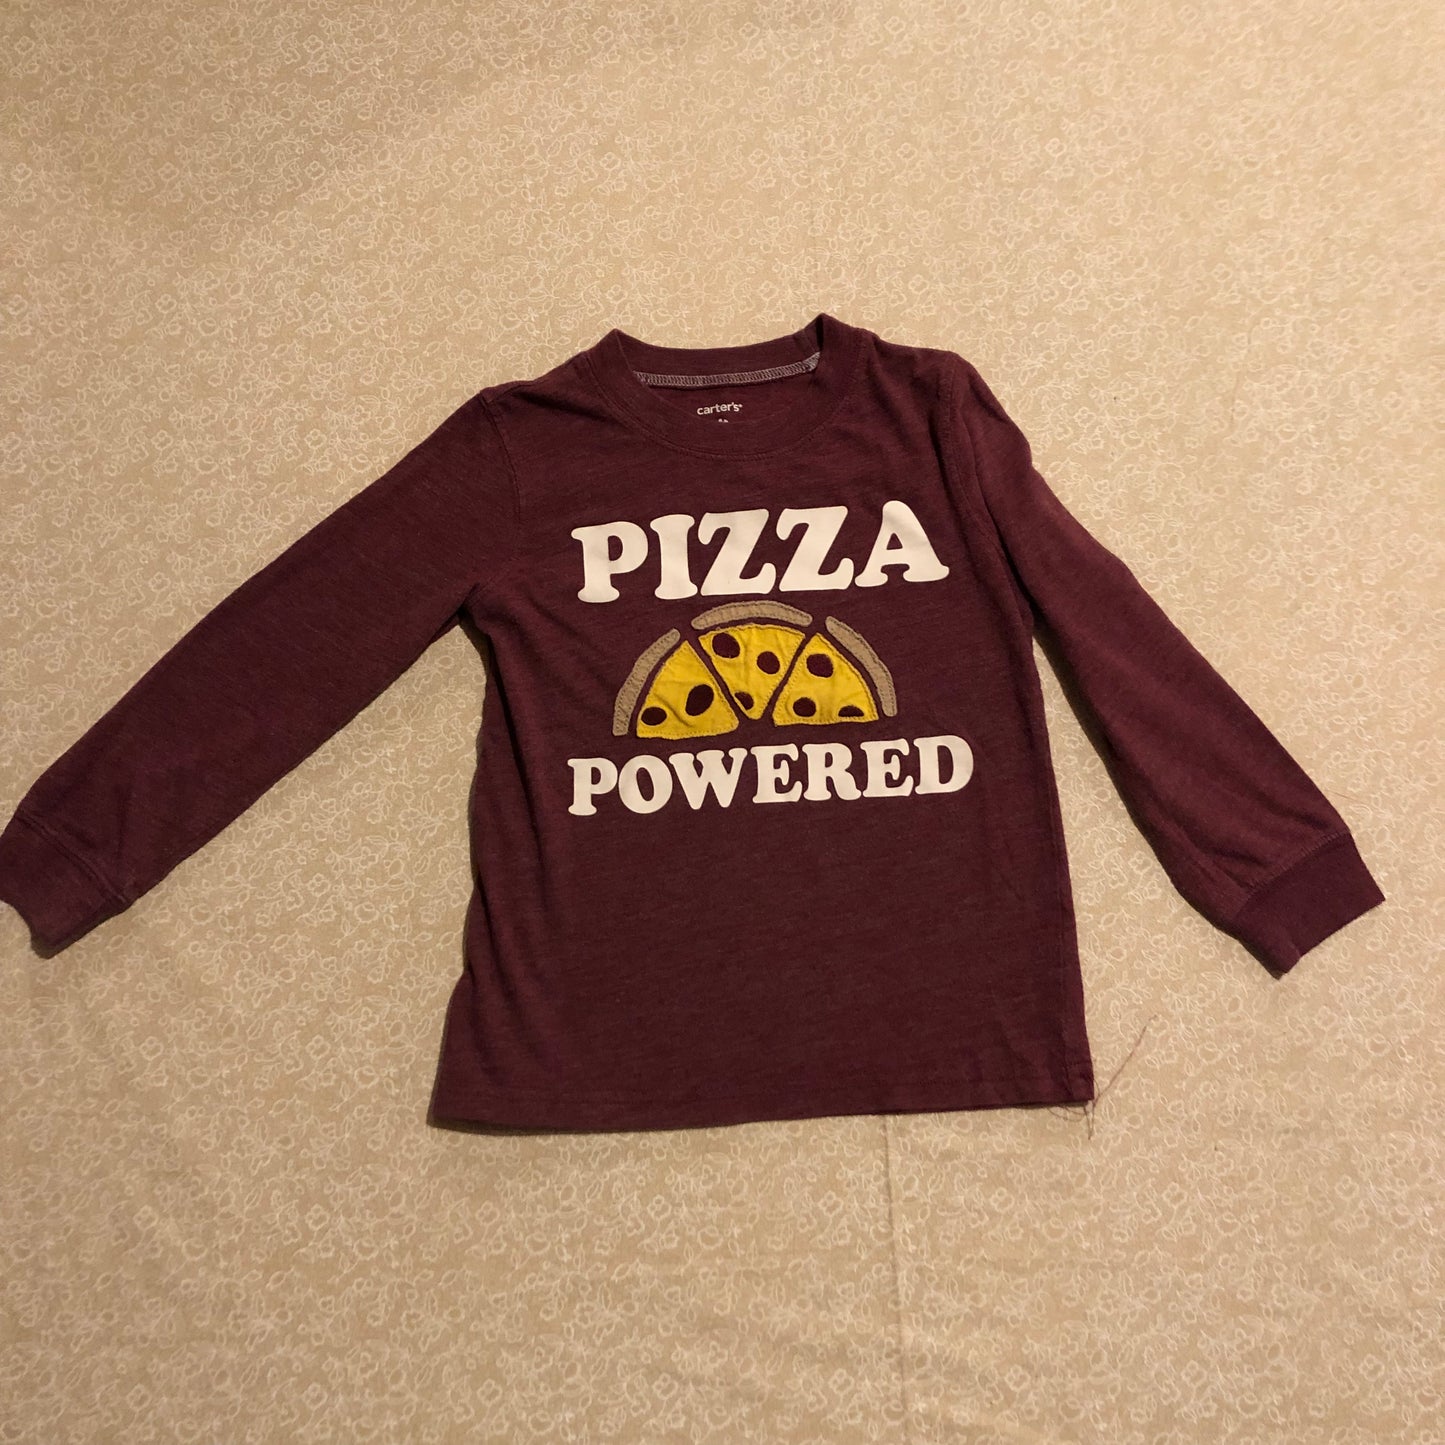 4t-shirt-long-sleeve-carters-red-pizza